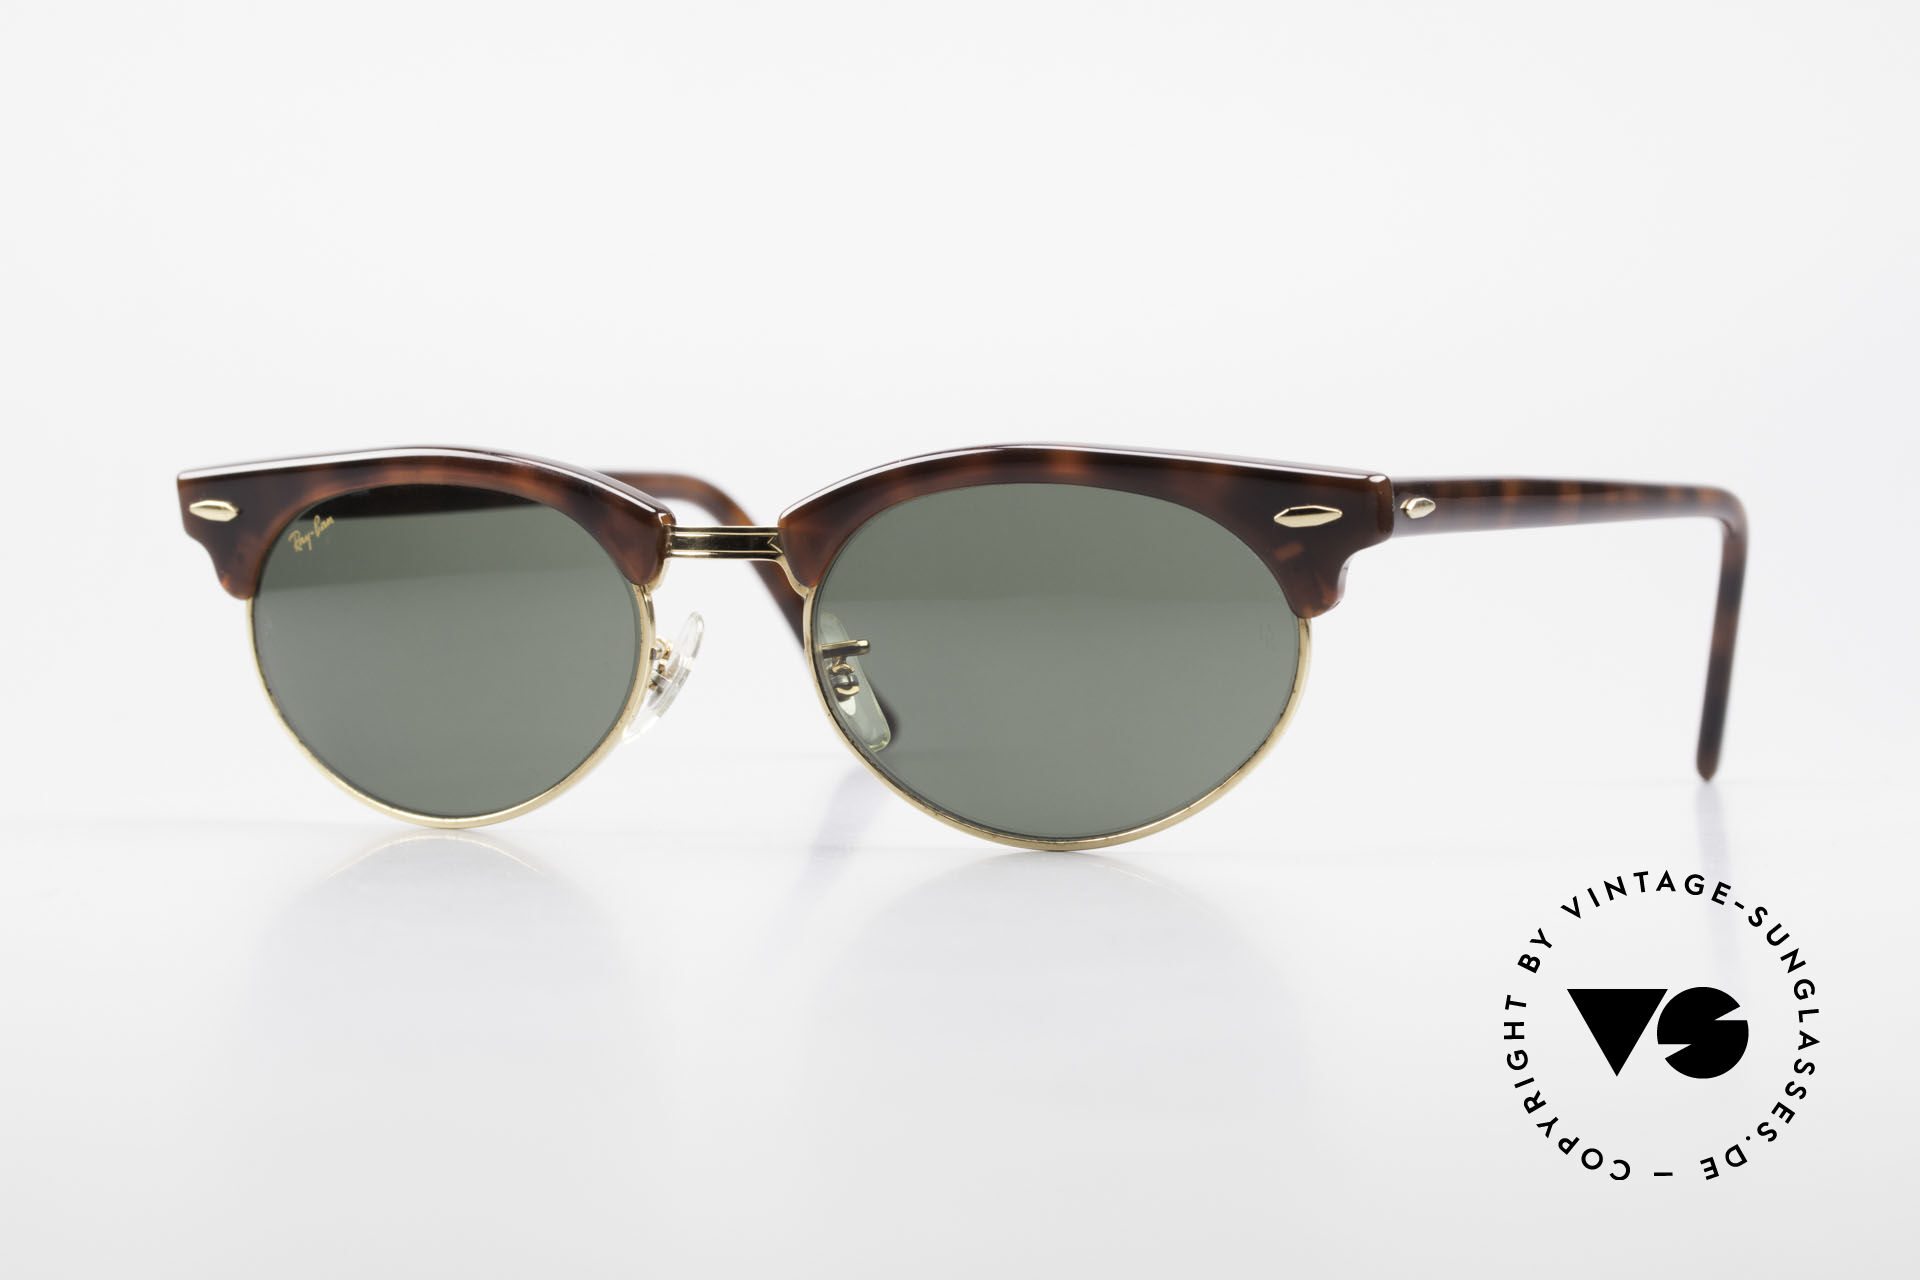 onkruid frequentie schapen Sunglasses Ray Ban Clubmaster Oval 80's Bausch & Lomb Original